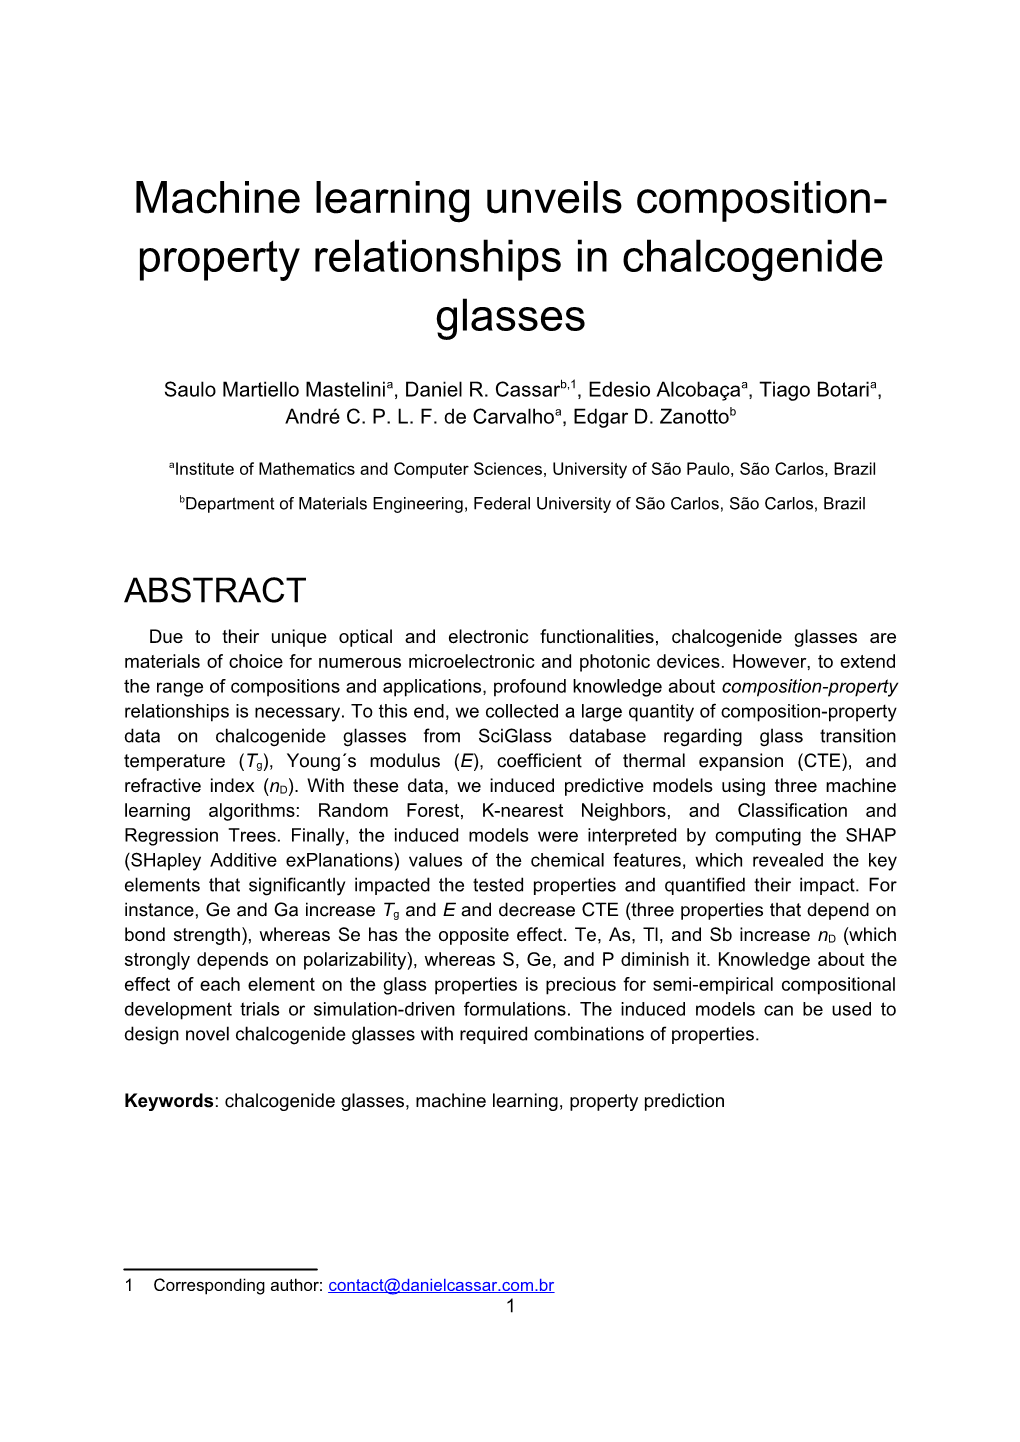 Machine Learning Unveils Composition- Property Relationships in Chalcogenide Glasses